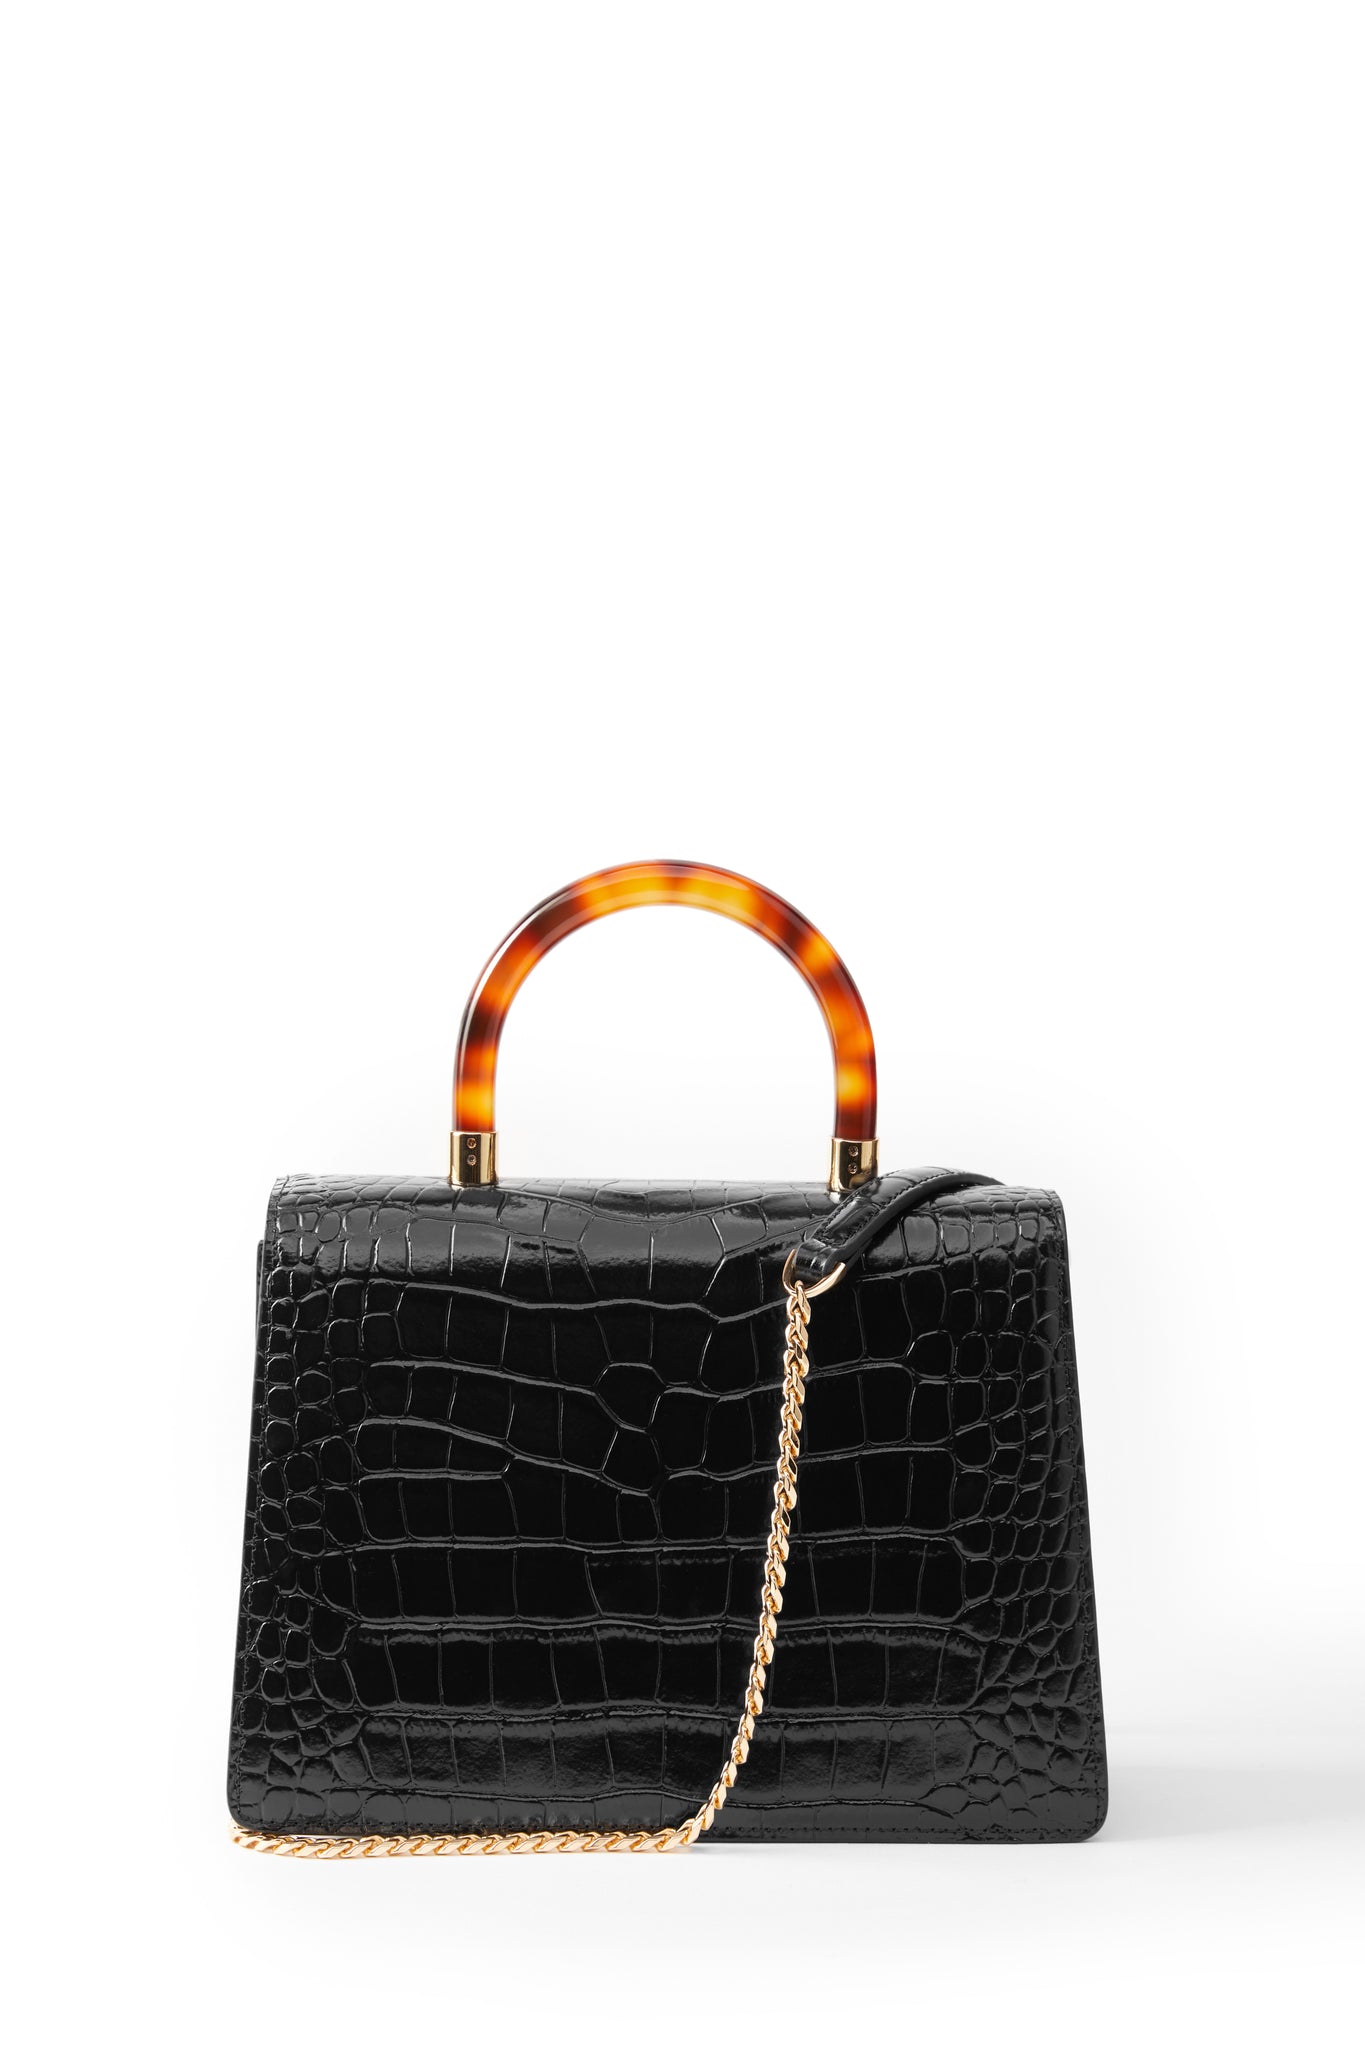 back image of womens black croc embossed leather shoulder bag with acetate tortoiseshell top handle and gold chain